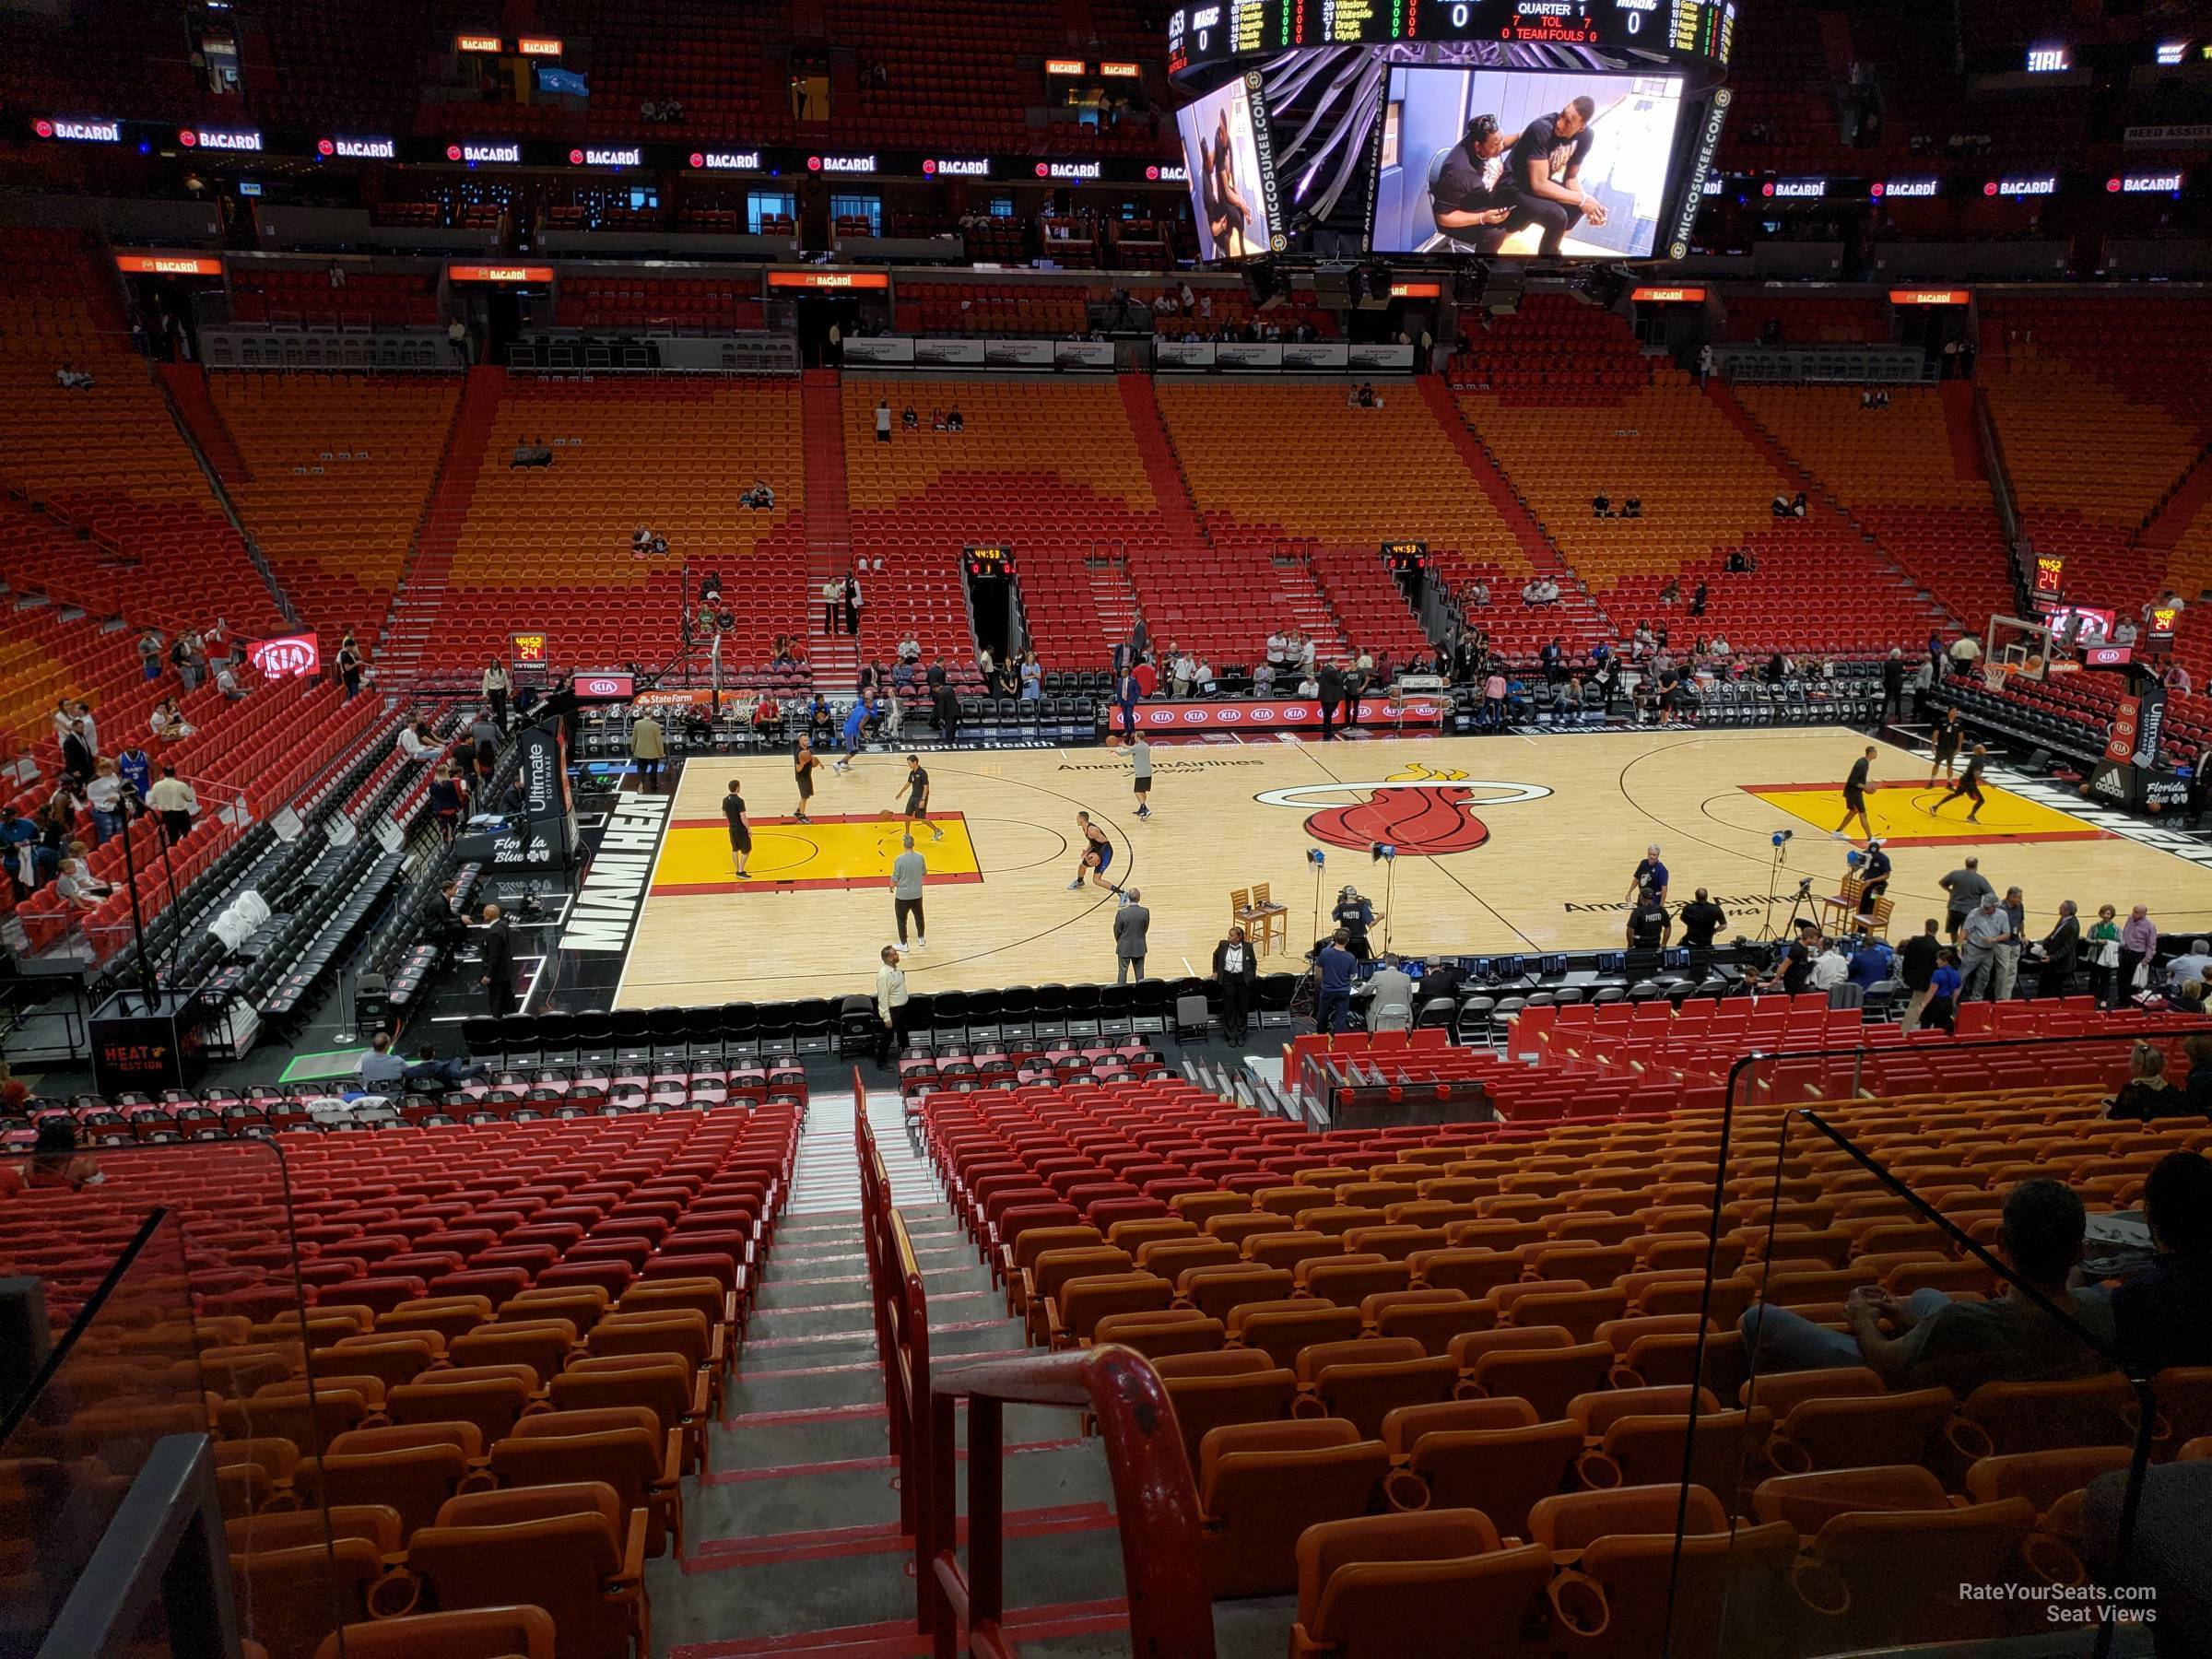 section 119 at americanairlines arena - miami heat